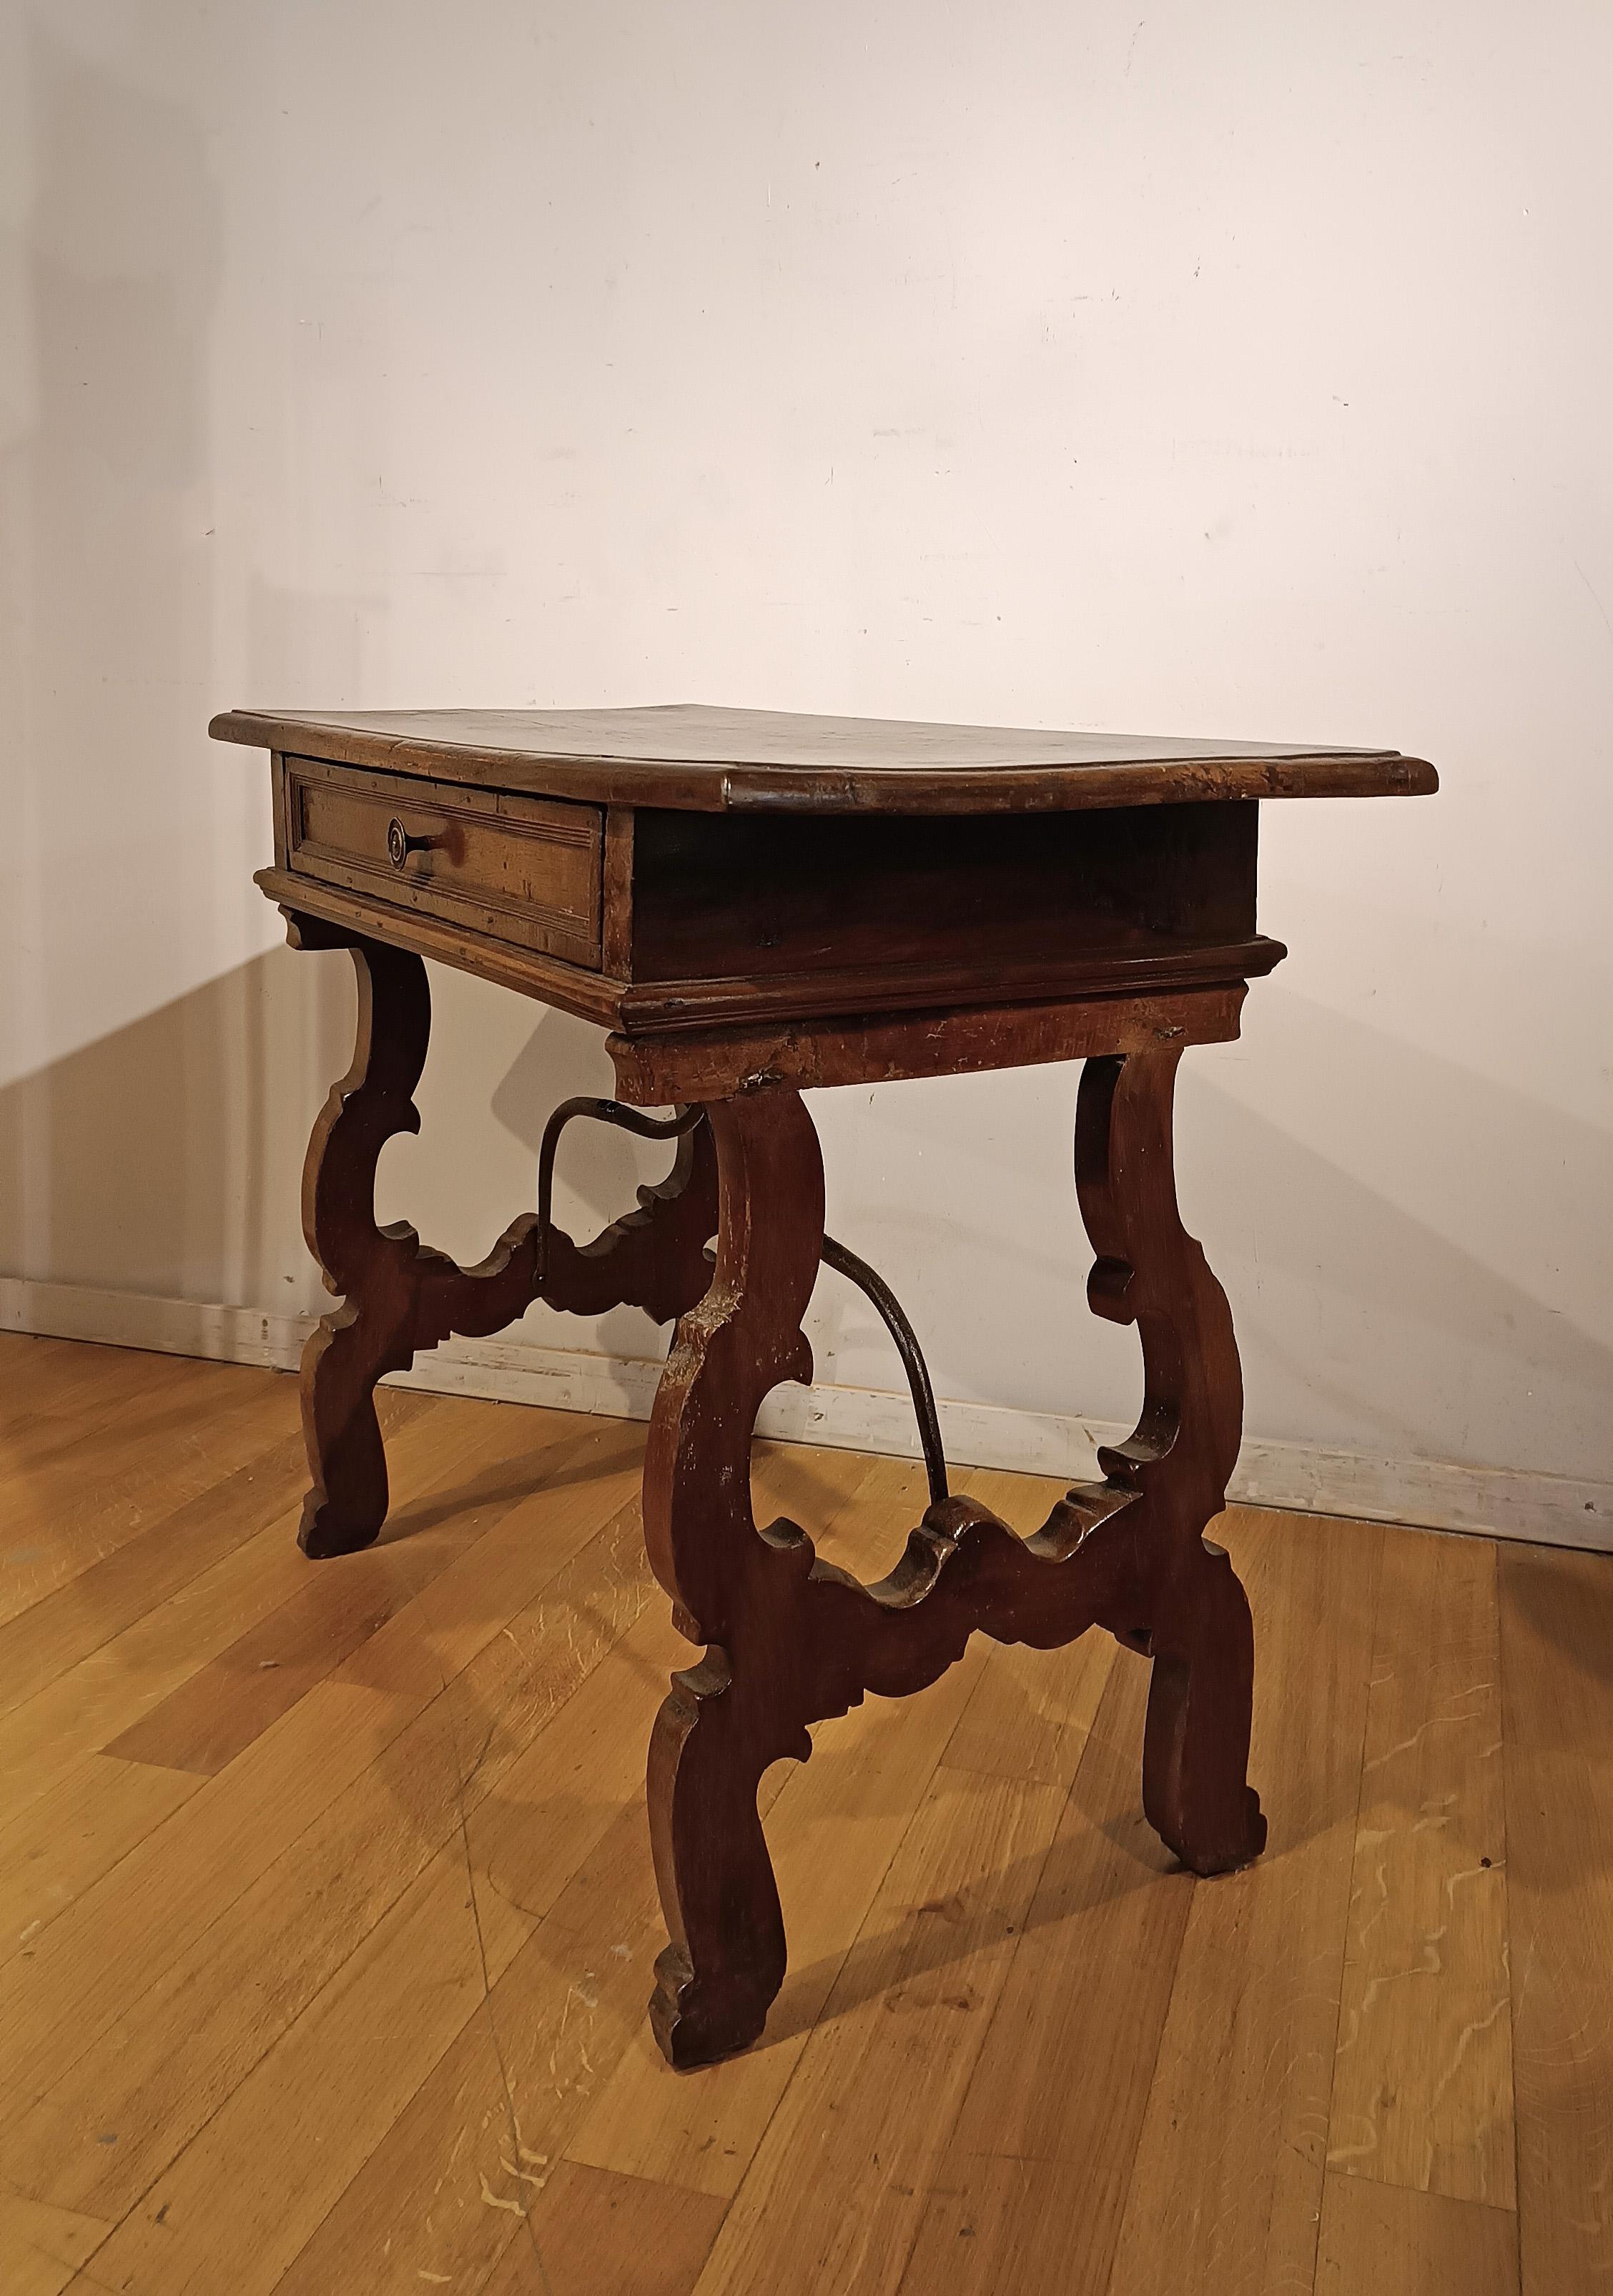 Hand-Carved 17th CENTURY SMALL WALNUT DESK For Sale